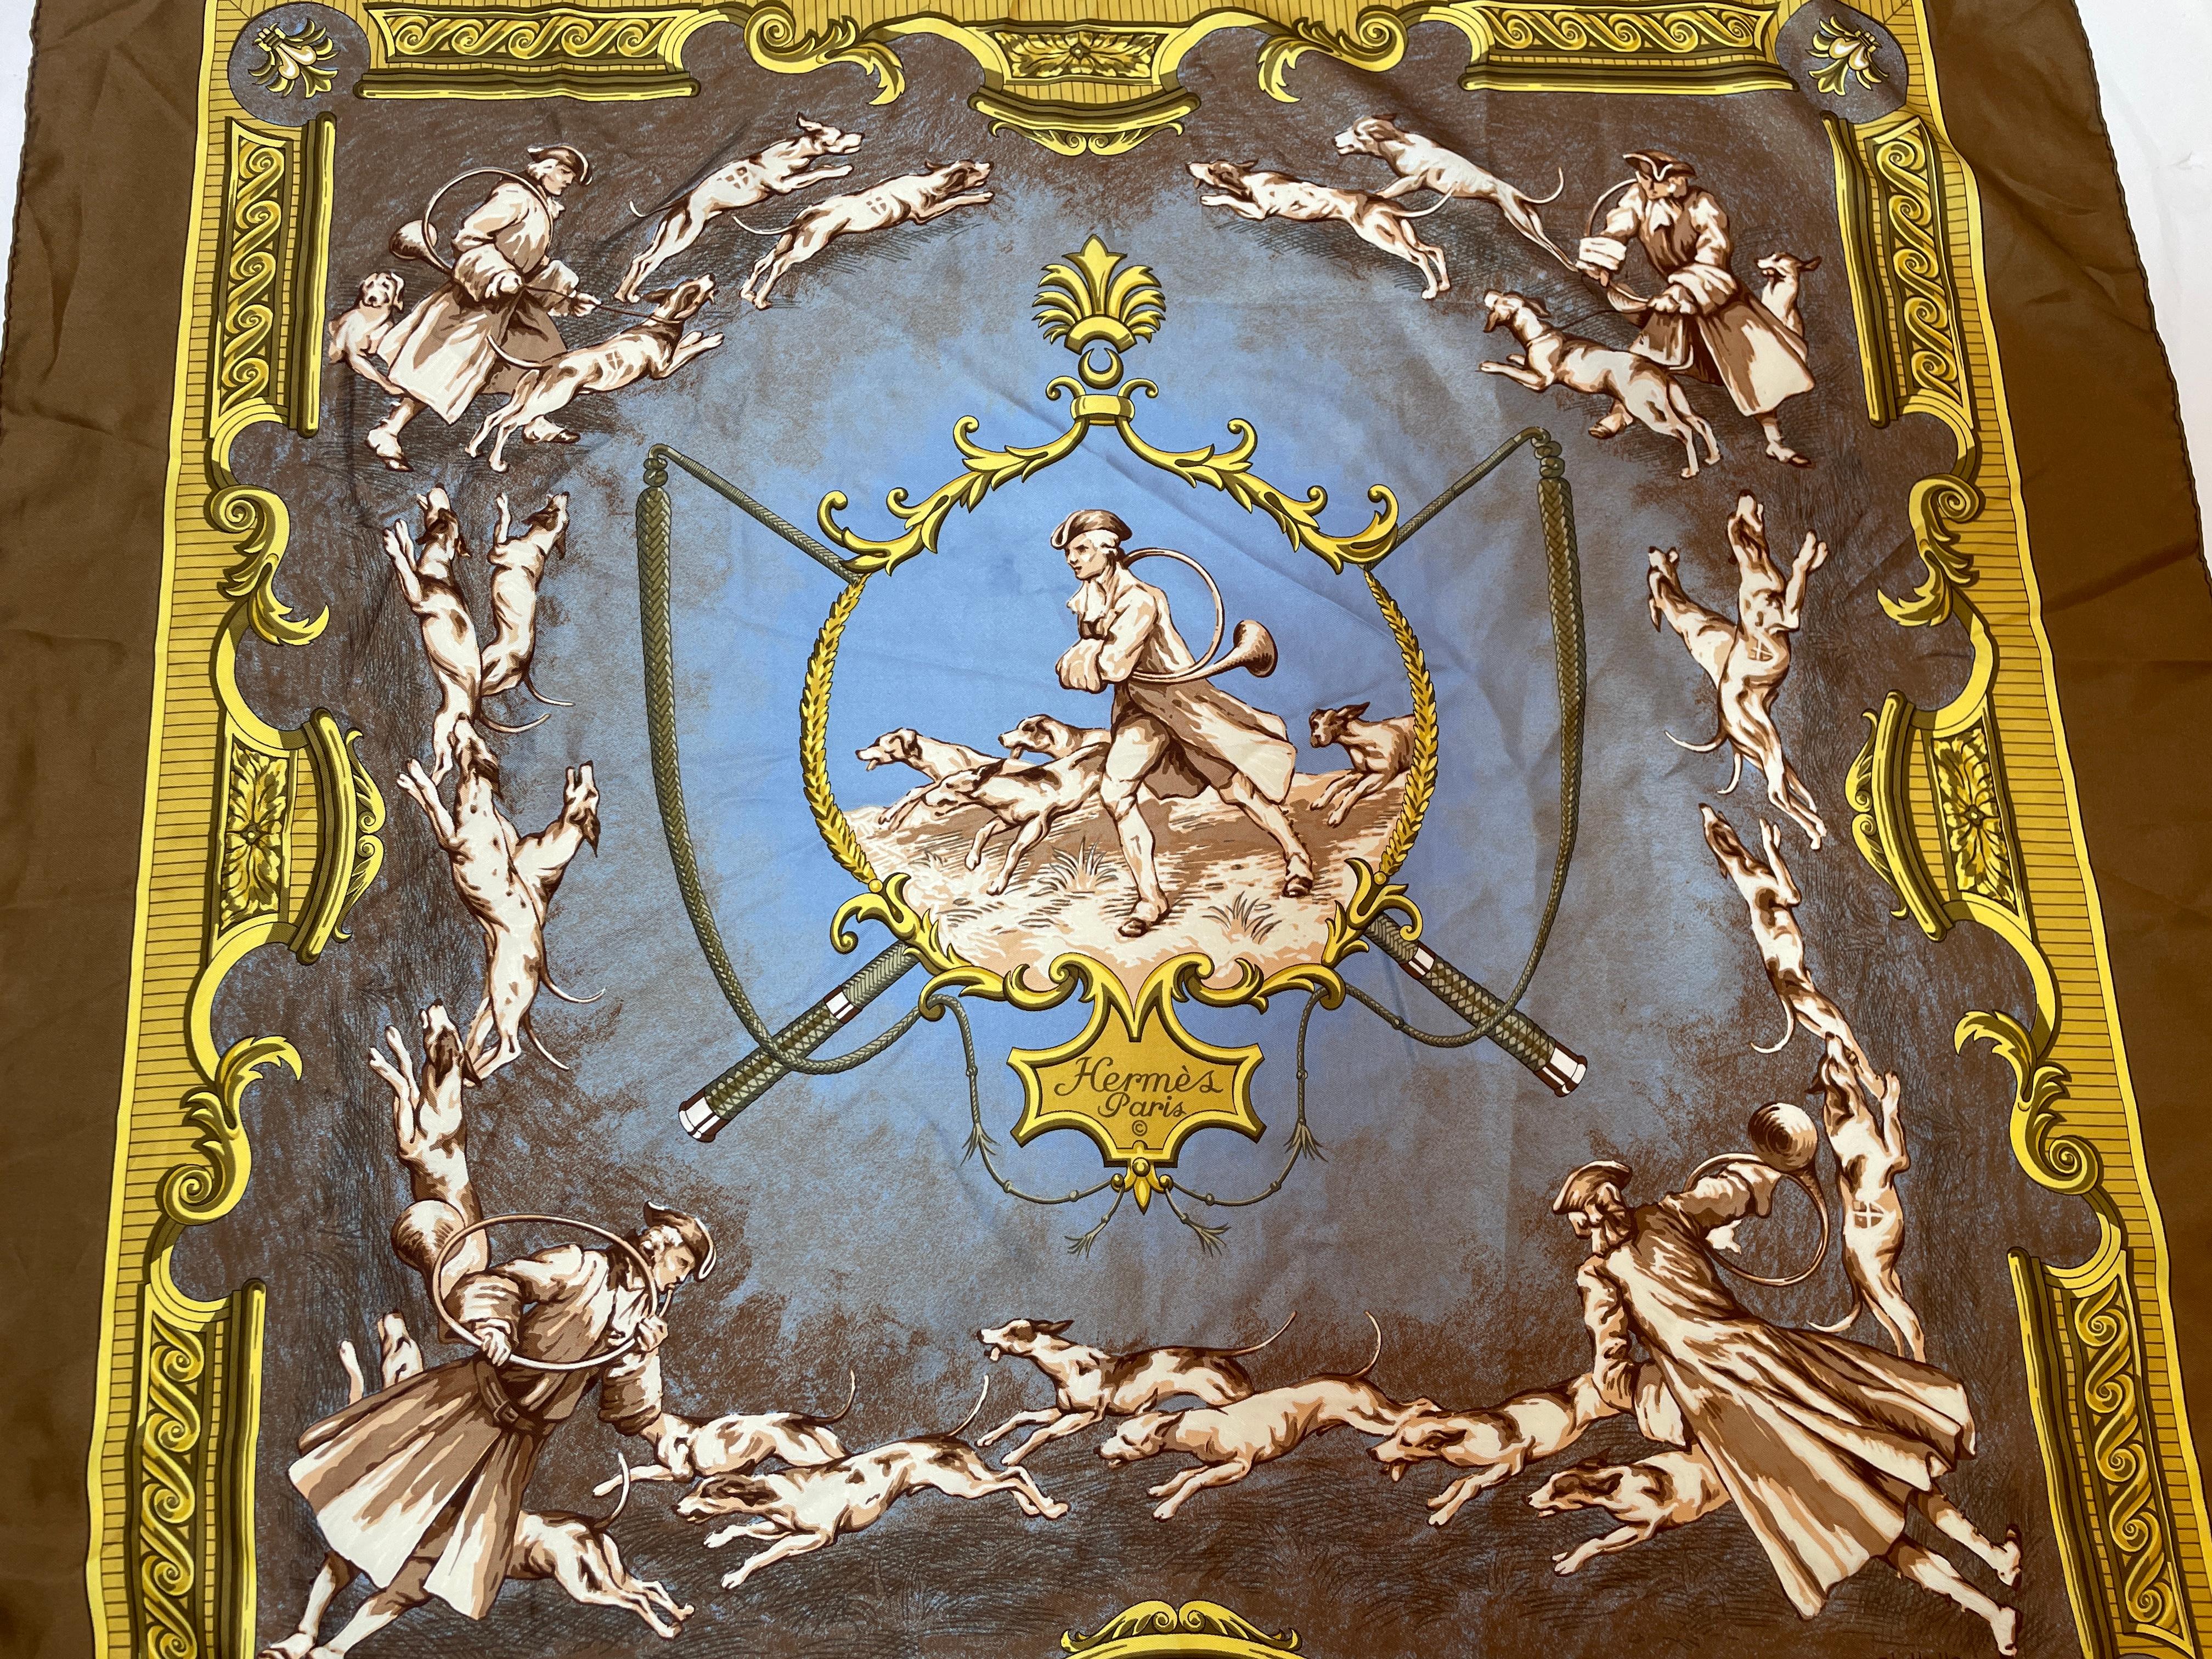 Hermes Chiens et Valets by Charles J. Hallo Silk Scarf 1963.
Gorgeous silk scarf carre Hermes in brown, blue and gold colors, featuring a 19th century period Royal French scene with Valets and Dogs in 
Very rare, Hermes silk scarf Chiens et Valets